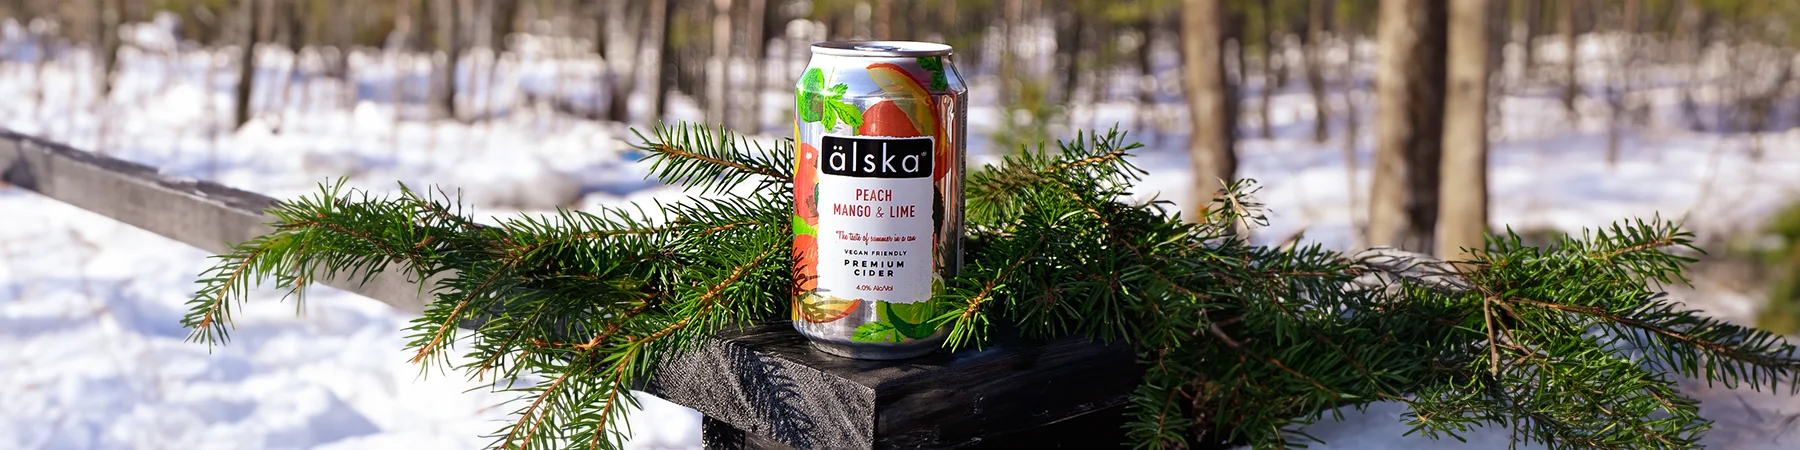 can of alska peach, mango & lime cider outside next to snow and trees